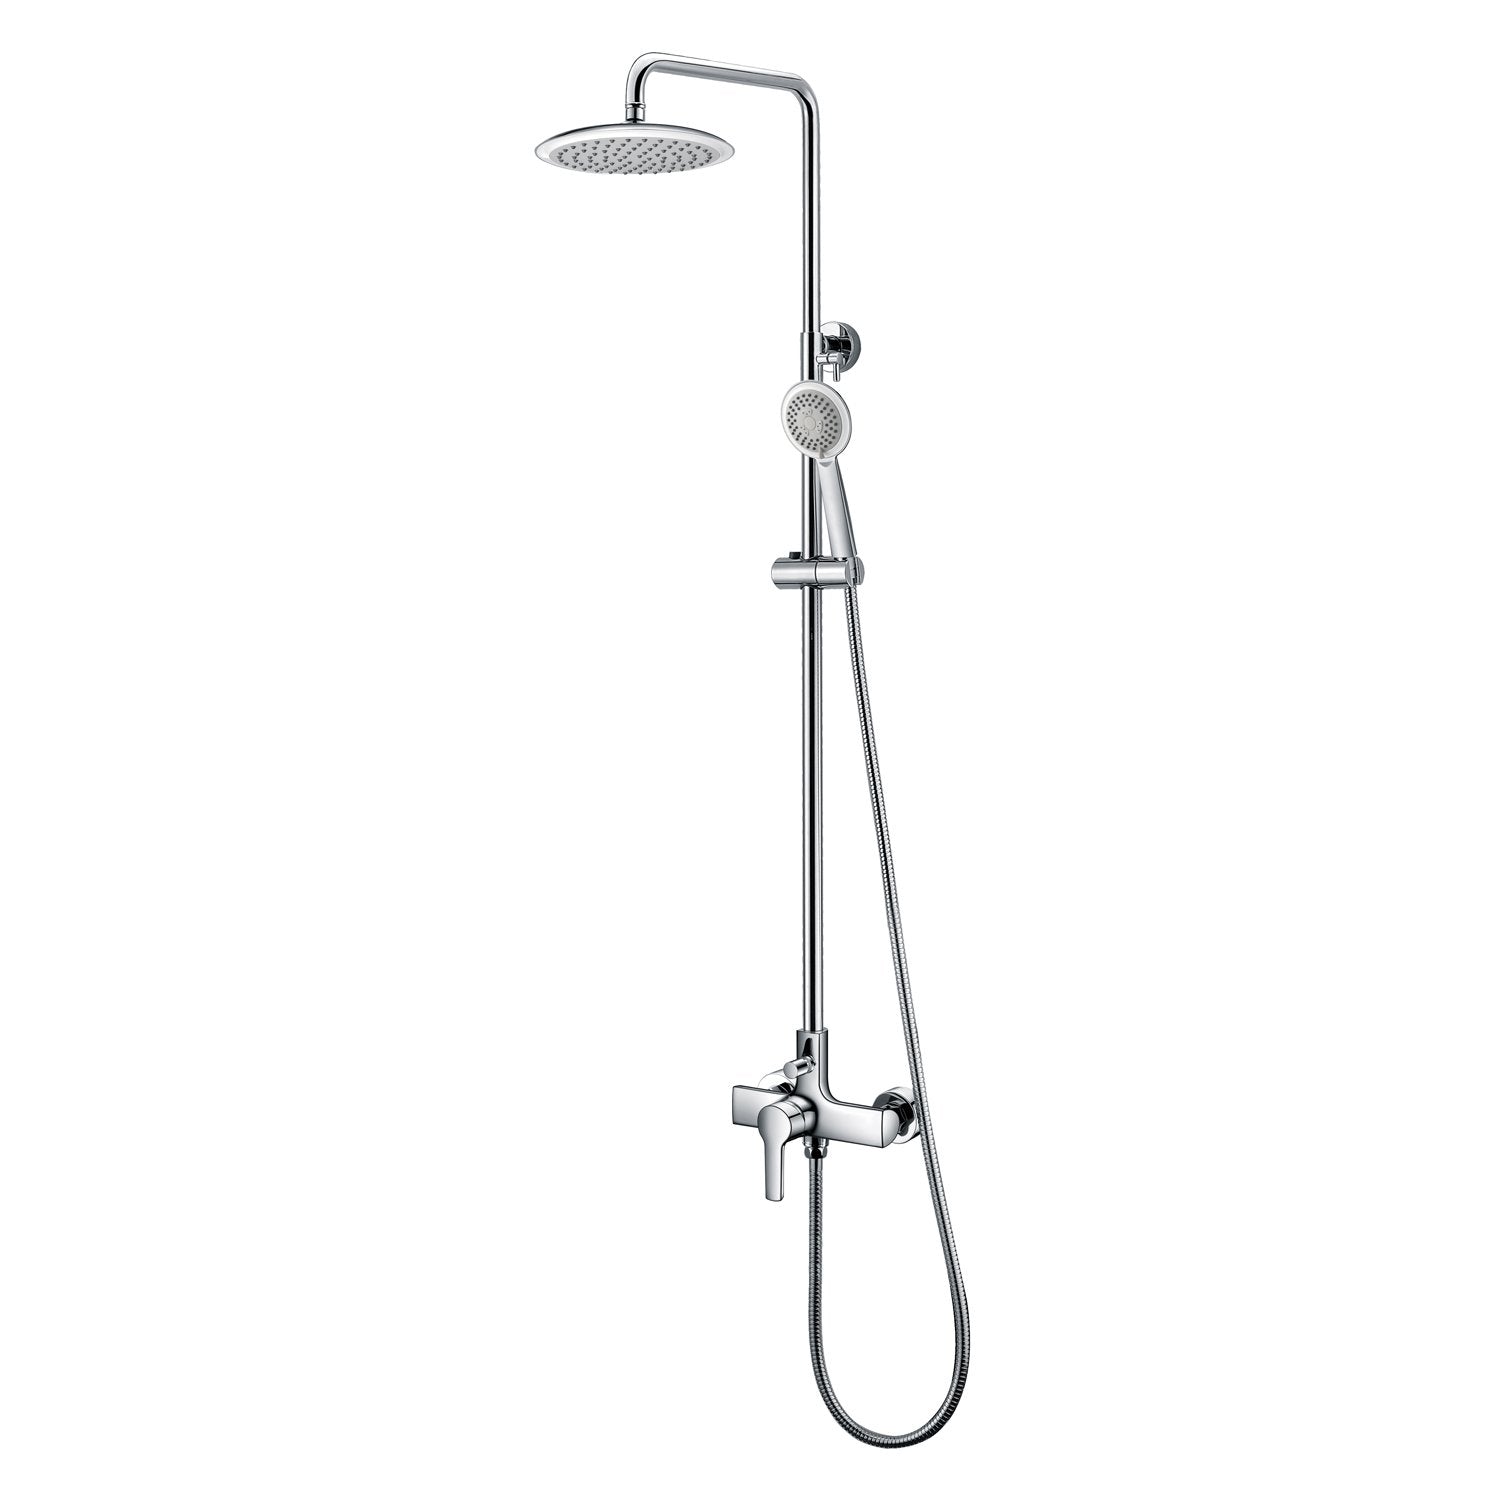 DAX Shower System, Faucet Set, with Round Rain Shower Head and Glide Rail Hand Shower, Wall Mount, Brass Body, Brushed Nickel Finish (DAX-8897-BN)